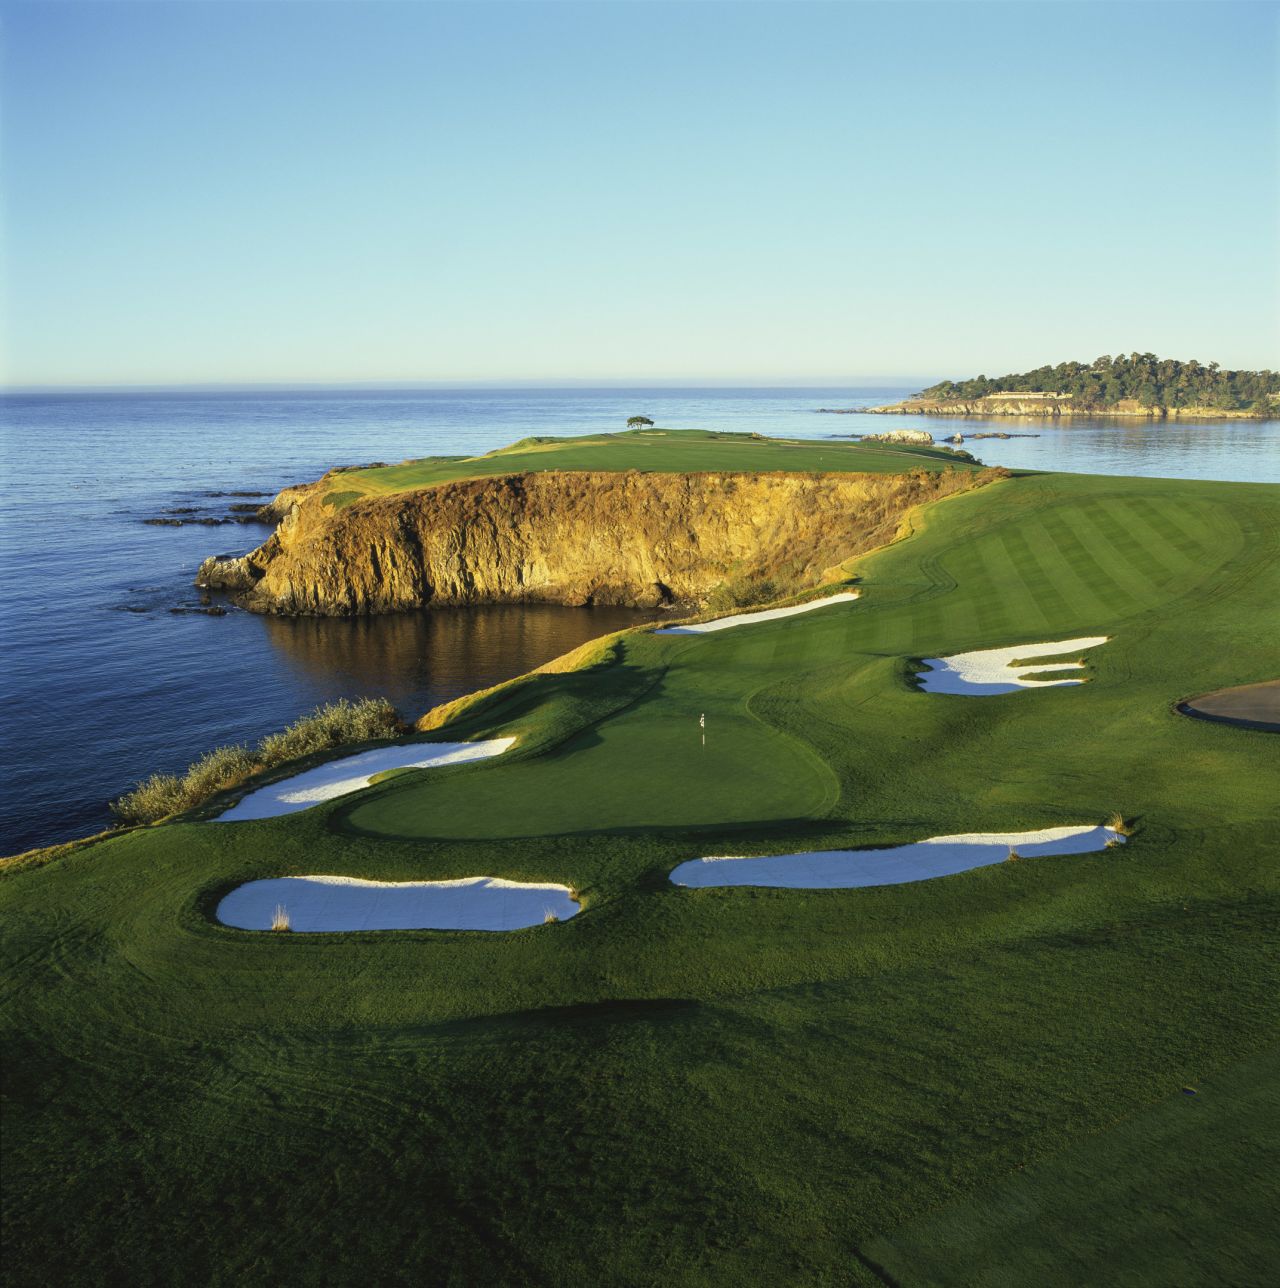 "If I had only one more round to play, I would choose to play it at Pebble Beach," said Jack Nicklaus. The iconic course overlooking the Pacific Ocean is one every golfer should hit. 